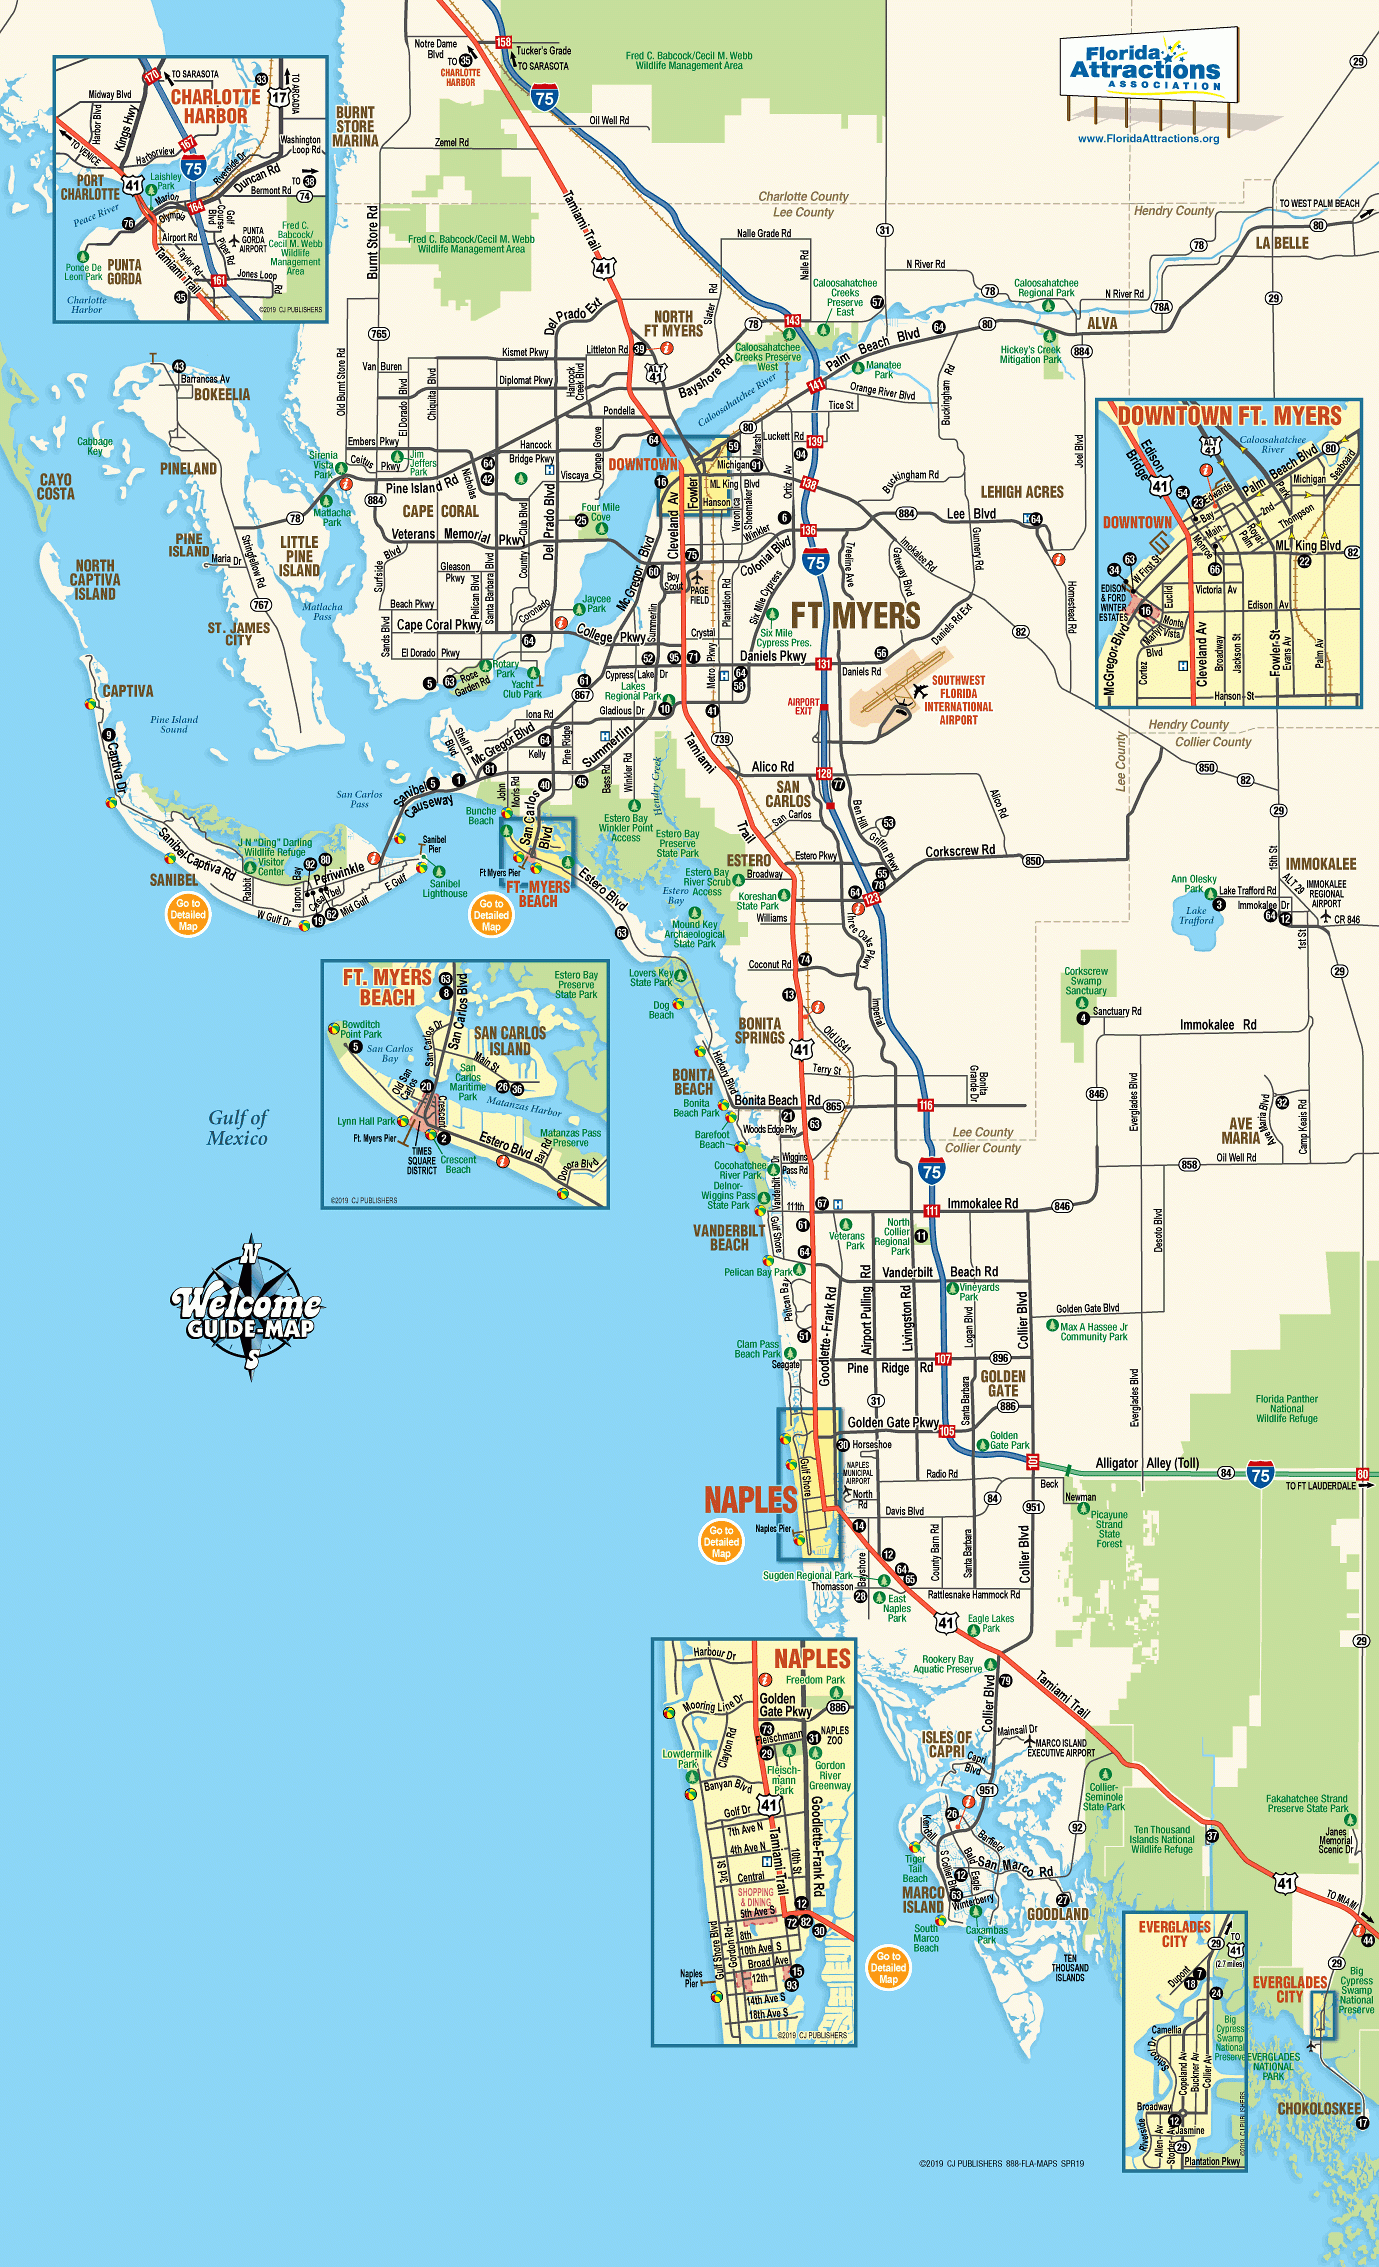 Map Of Southwest Florida - Welcome Guide-Map To Fort Myers &amp;amp; Naples - Vanderbilt Beach Florida Map